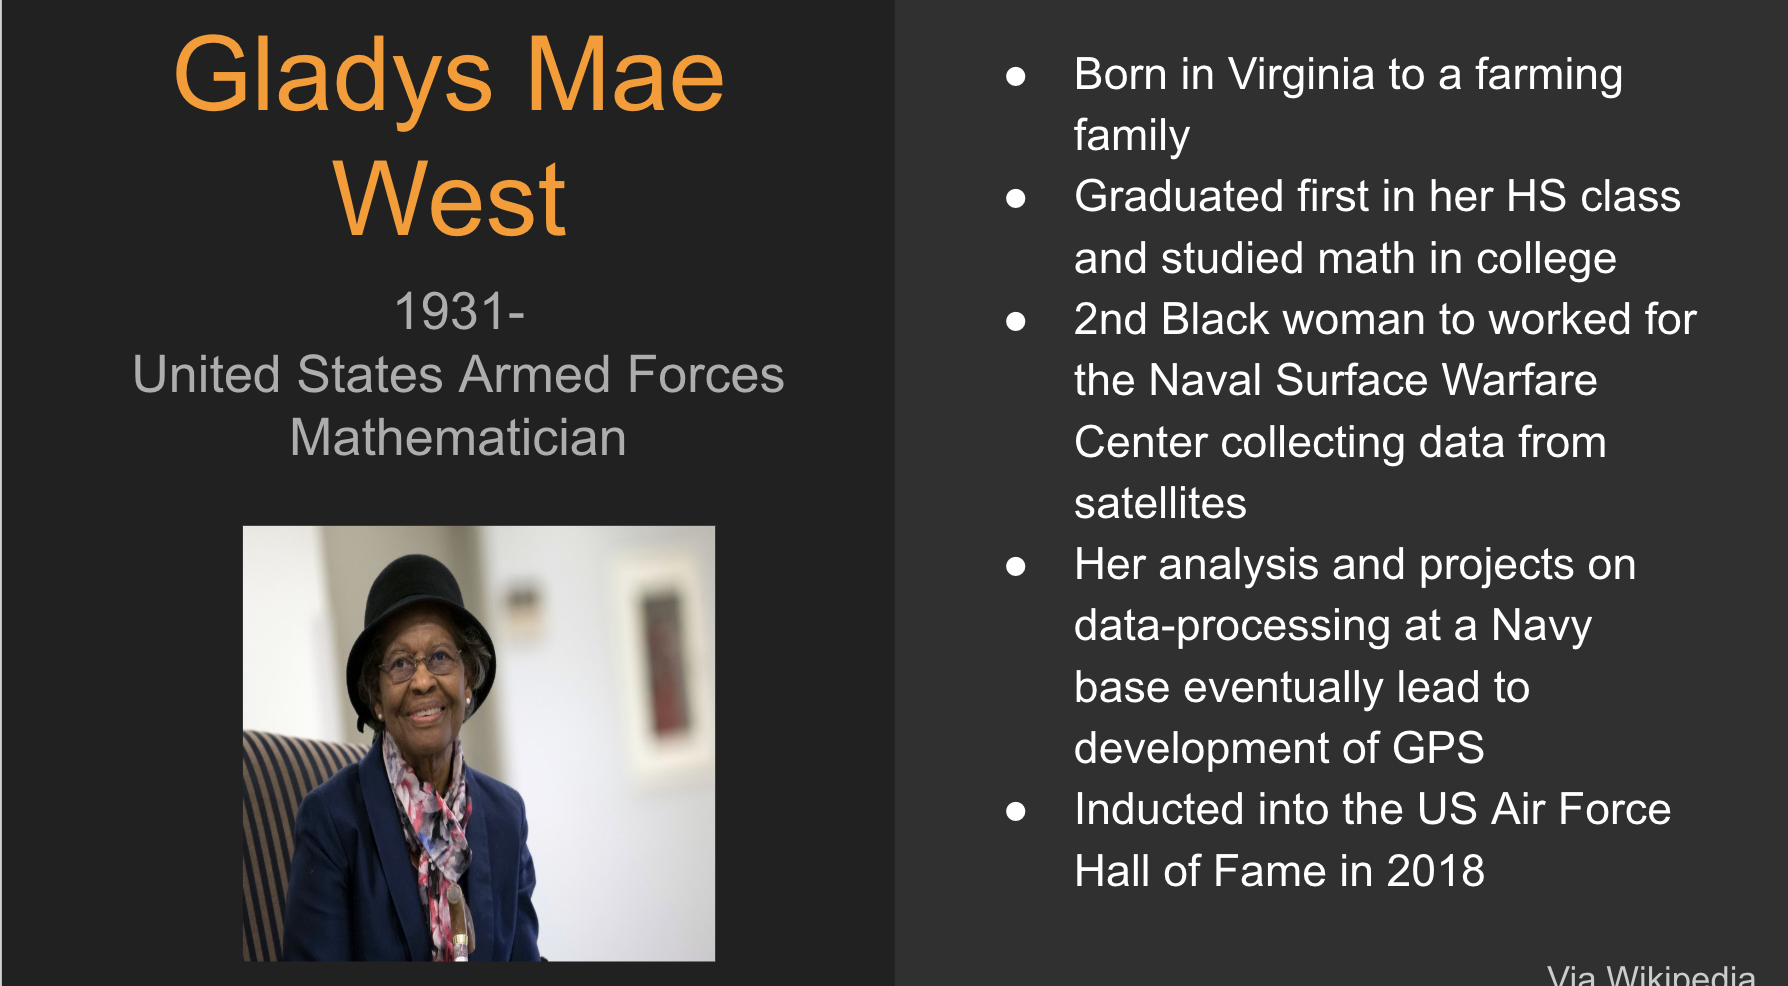 Gladys Mae West. 1931 - Present. United States armed forces mathematician. Photo of a black woman in her 60's or 70's wearing a suit jacket and colorful scarf as well as a black bowler hat. She is sitting and smiling. Bullet points read: Born in Virginia to a farming family. Graduated first in her HS class and studied math in college. 2nd Black woman to work for the Naval Surface warfare center collecting data from satellites. Her analysis and projects on data-processing at a Navy base led to development of GPS. Inducted into the US Air Force Hall of Fame in 2018. 